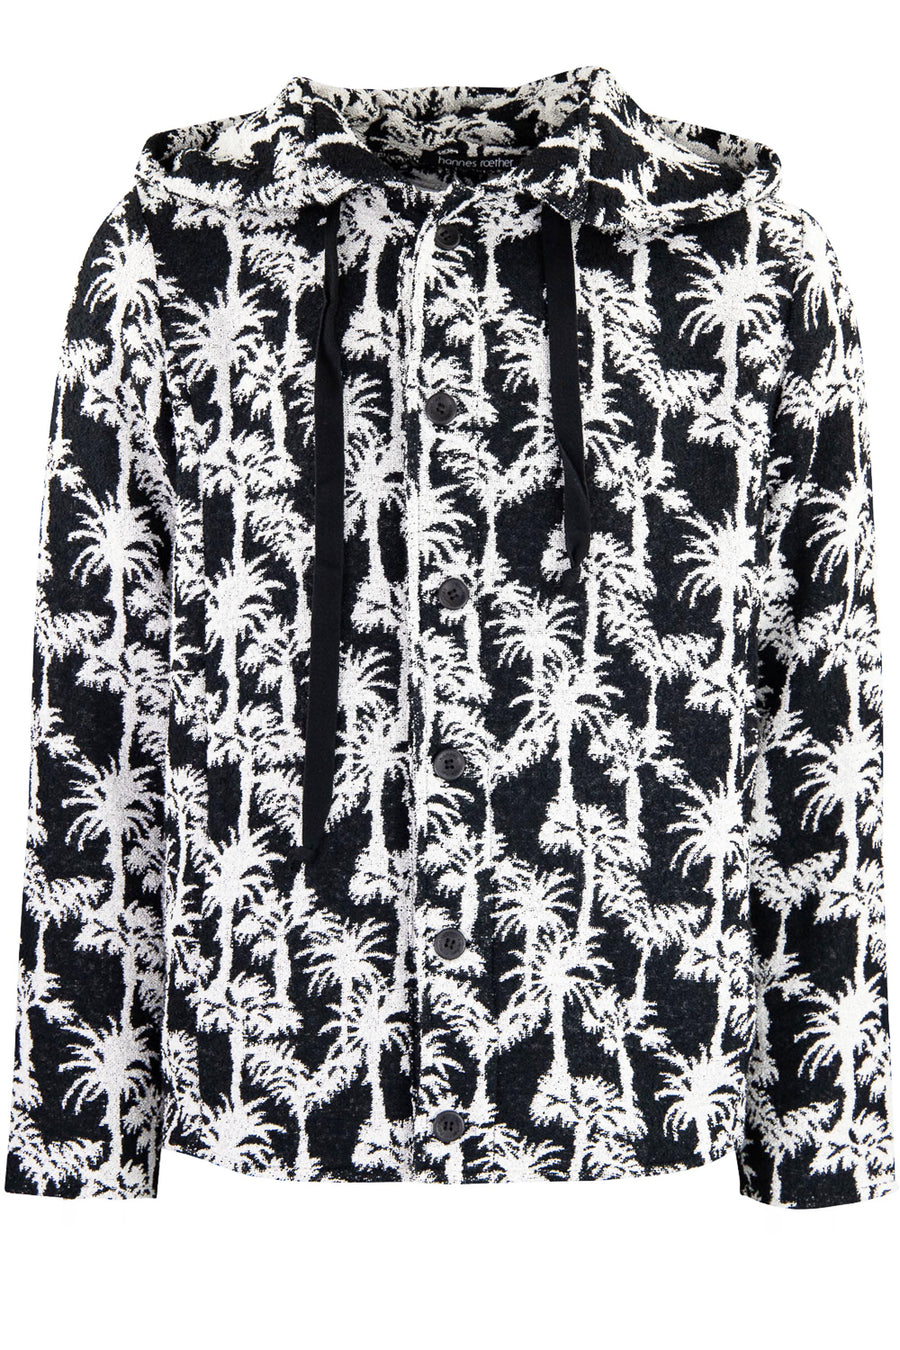 Buy the Hannes Roether Palm Tree Cotton Knit Hoodie in Black/White at Intro. Spend £50 for free UK delivery. Official stockists. We ship worldwide.